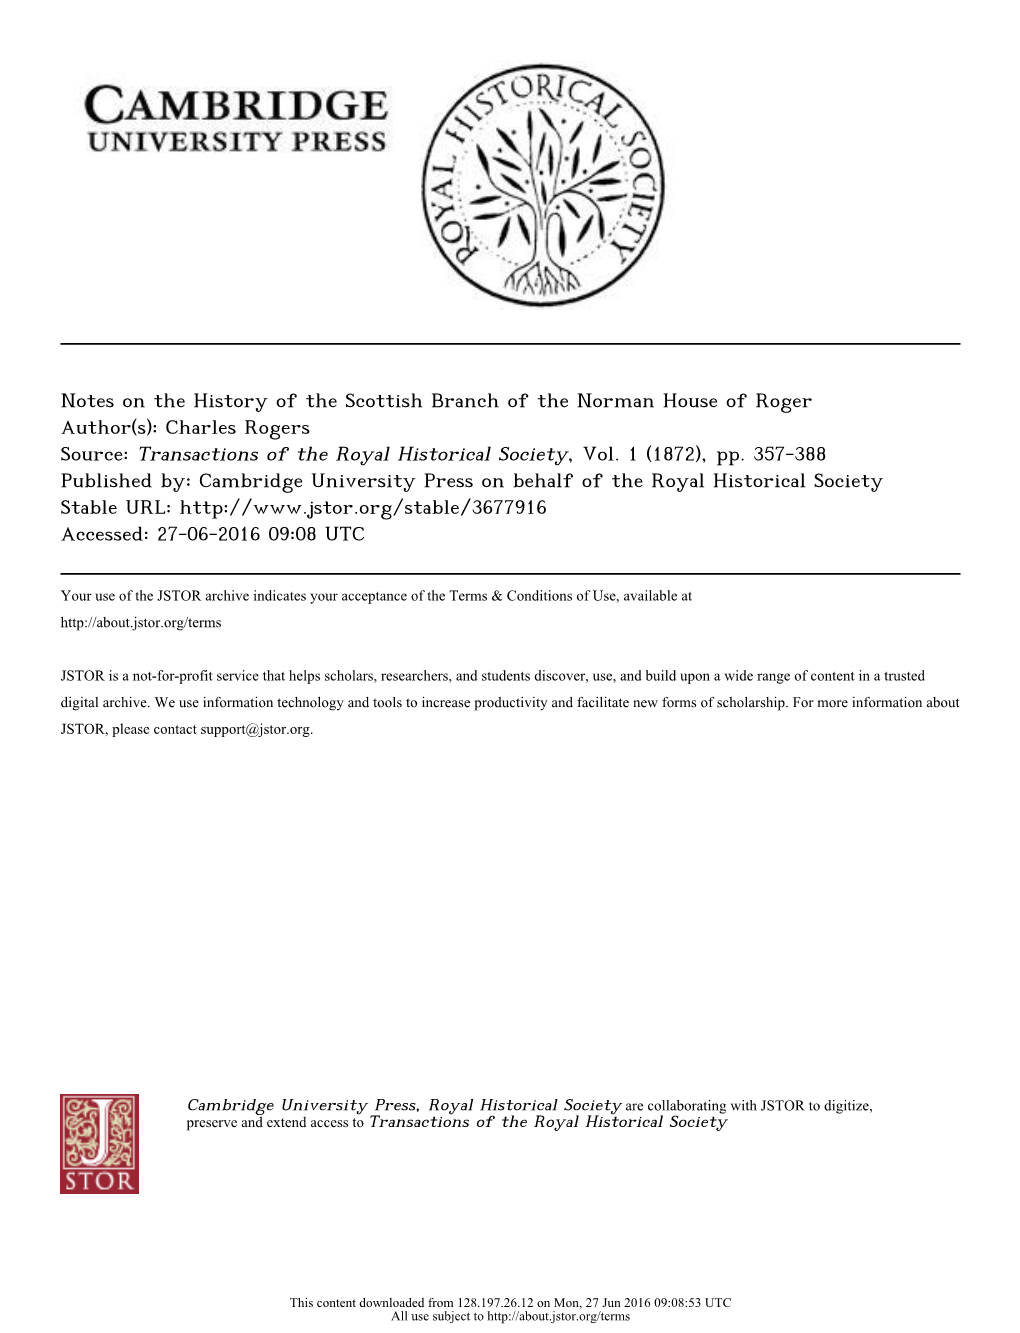 Notes on the History of the Scottish Branch of the Norman House of Roger Author(S): Charles Rogers Source: Transactions of the Royal Historical Society, Vol